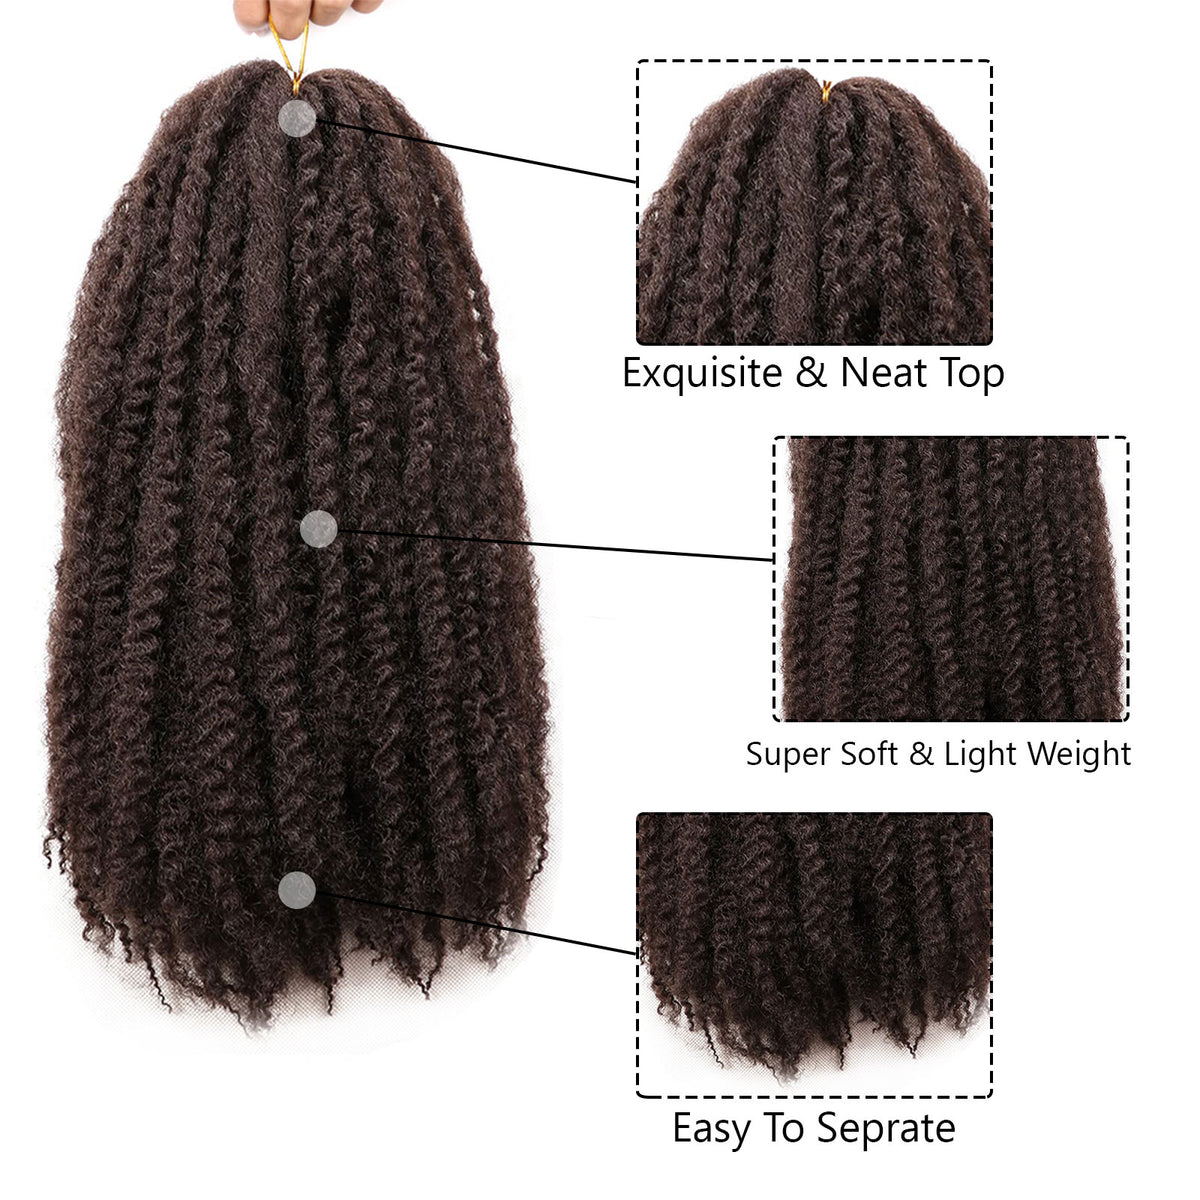 18 Inches Pack of 3 Marley Hair For Faux Locs Soft & Bouncy Cuban Twist Hair Synthetic Kanekalon Kinky Twist Hair For Braiding Crochet Marley Twist Braiding Hair For Black Woman #33